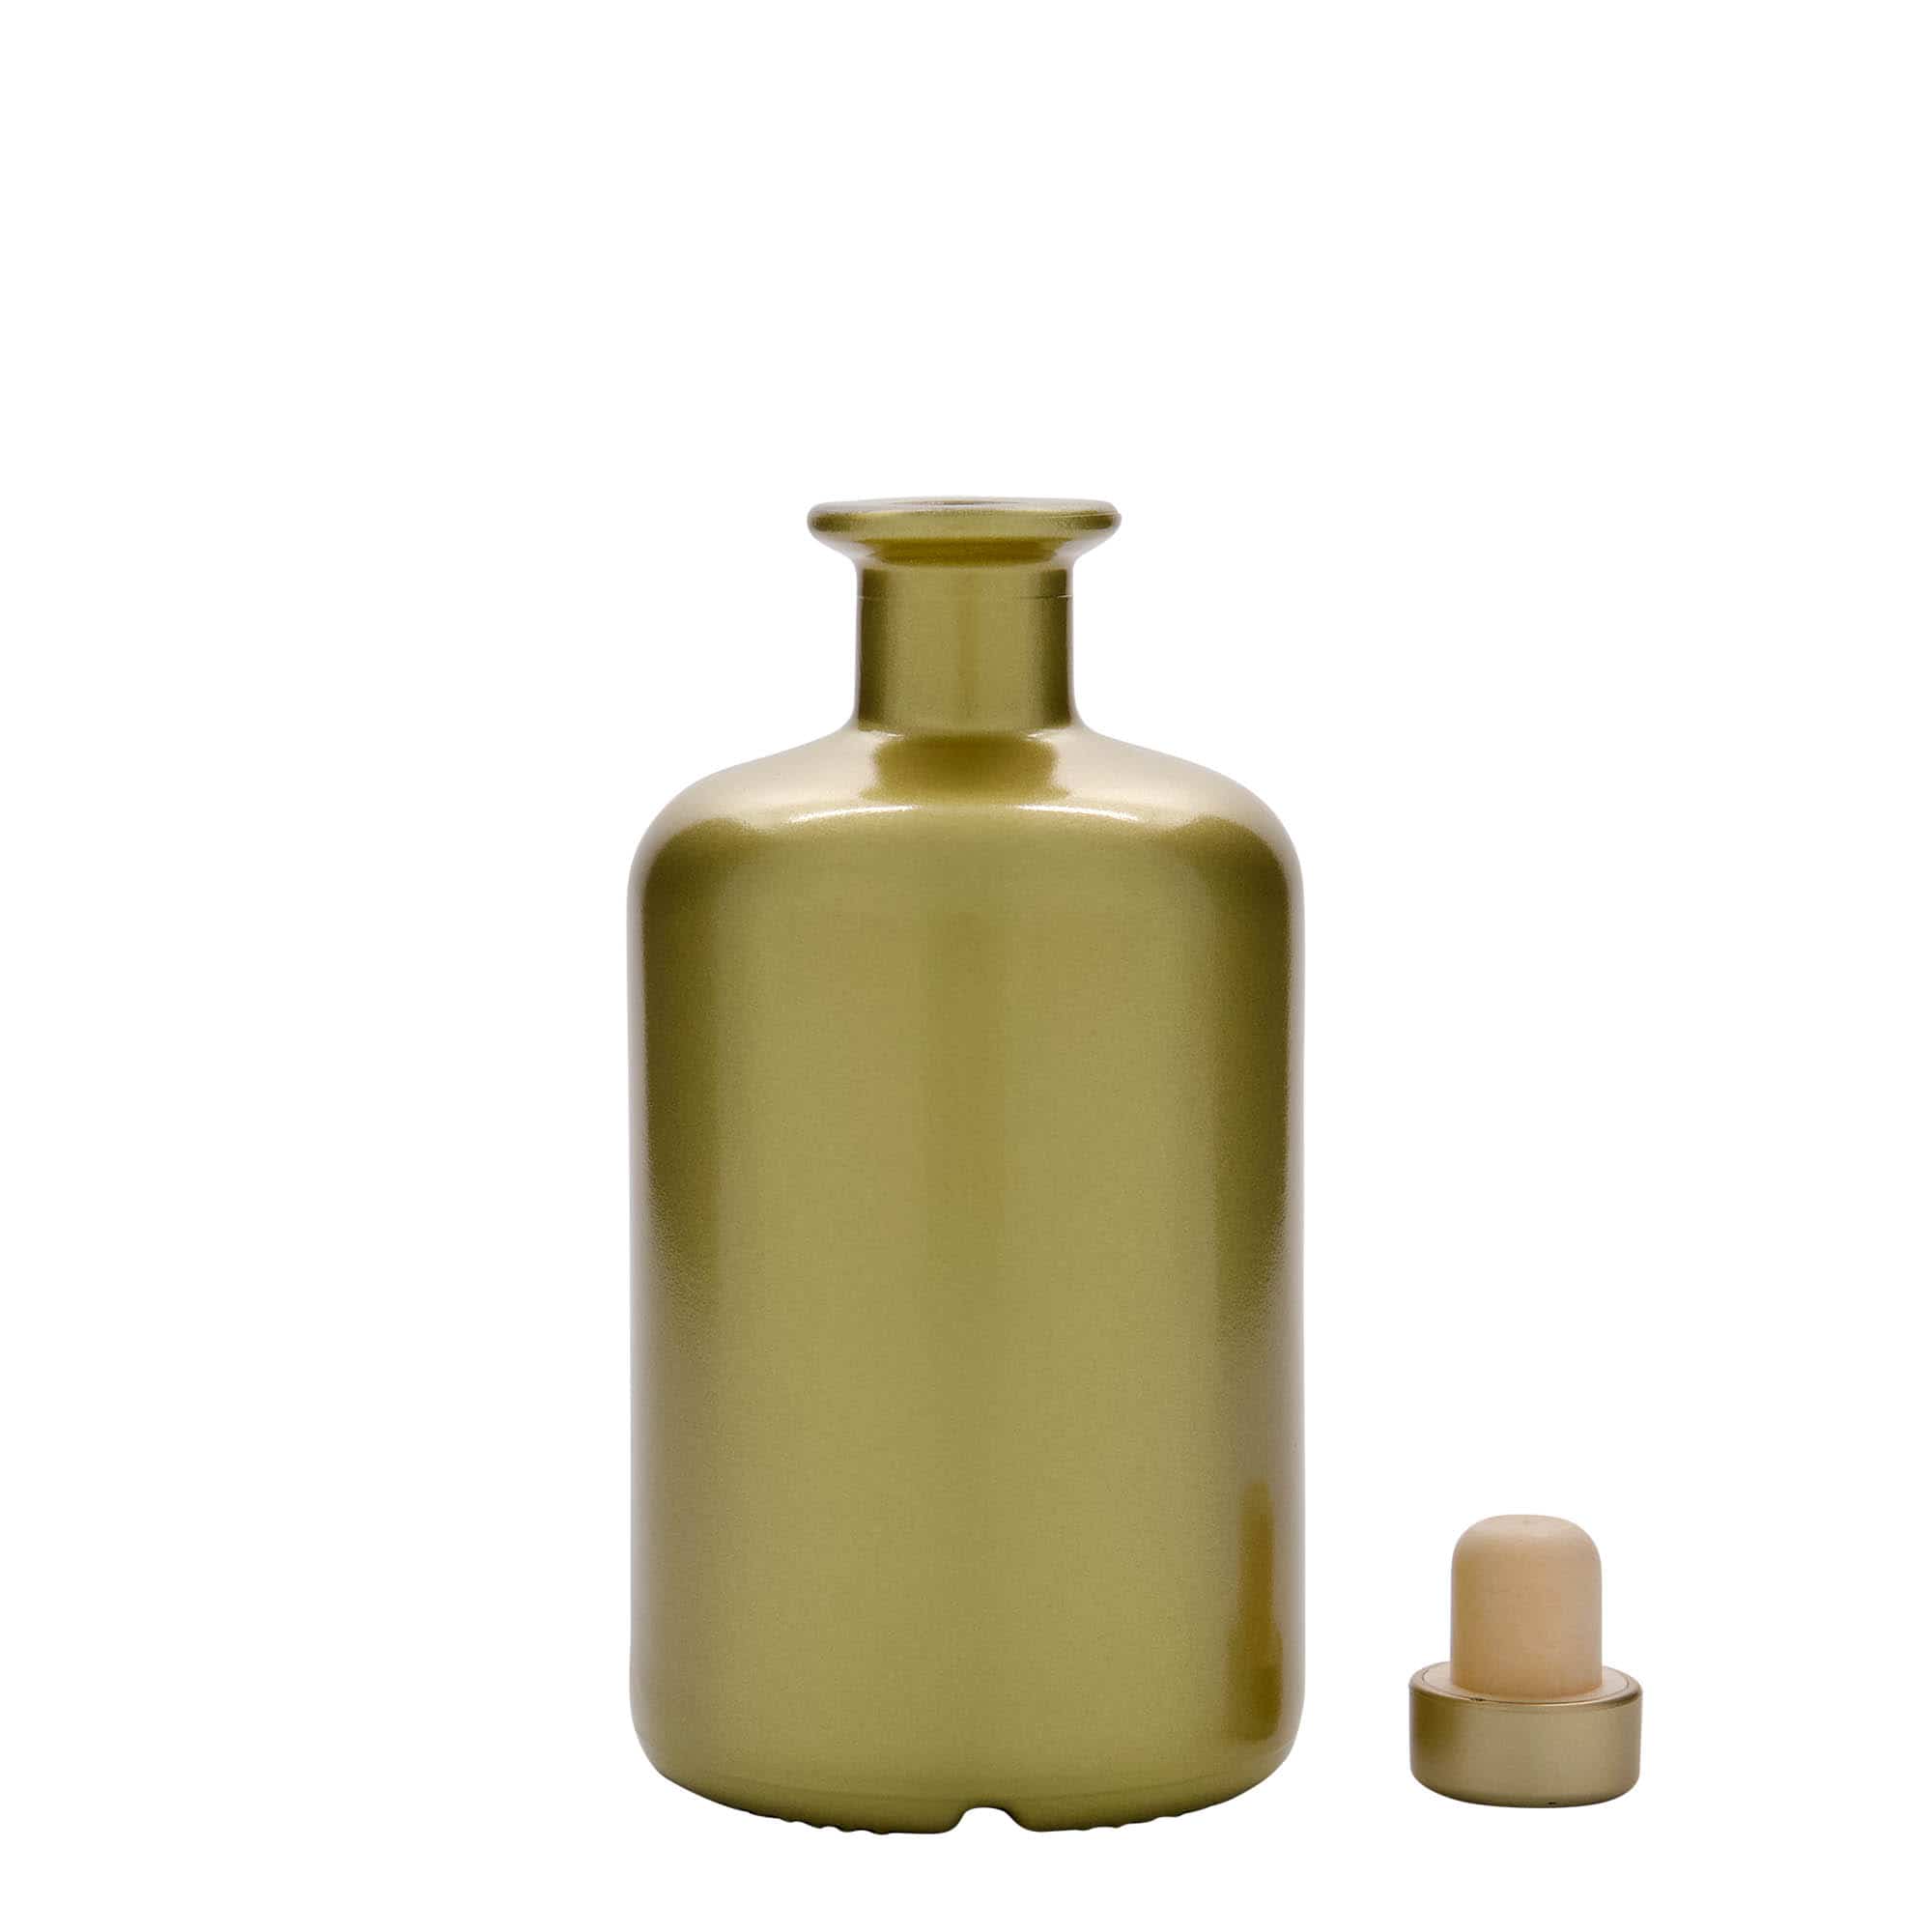 500 ml glass apothecary bottle, gold, closure: cork